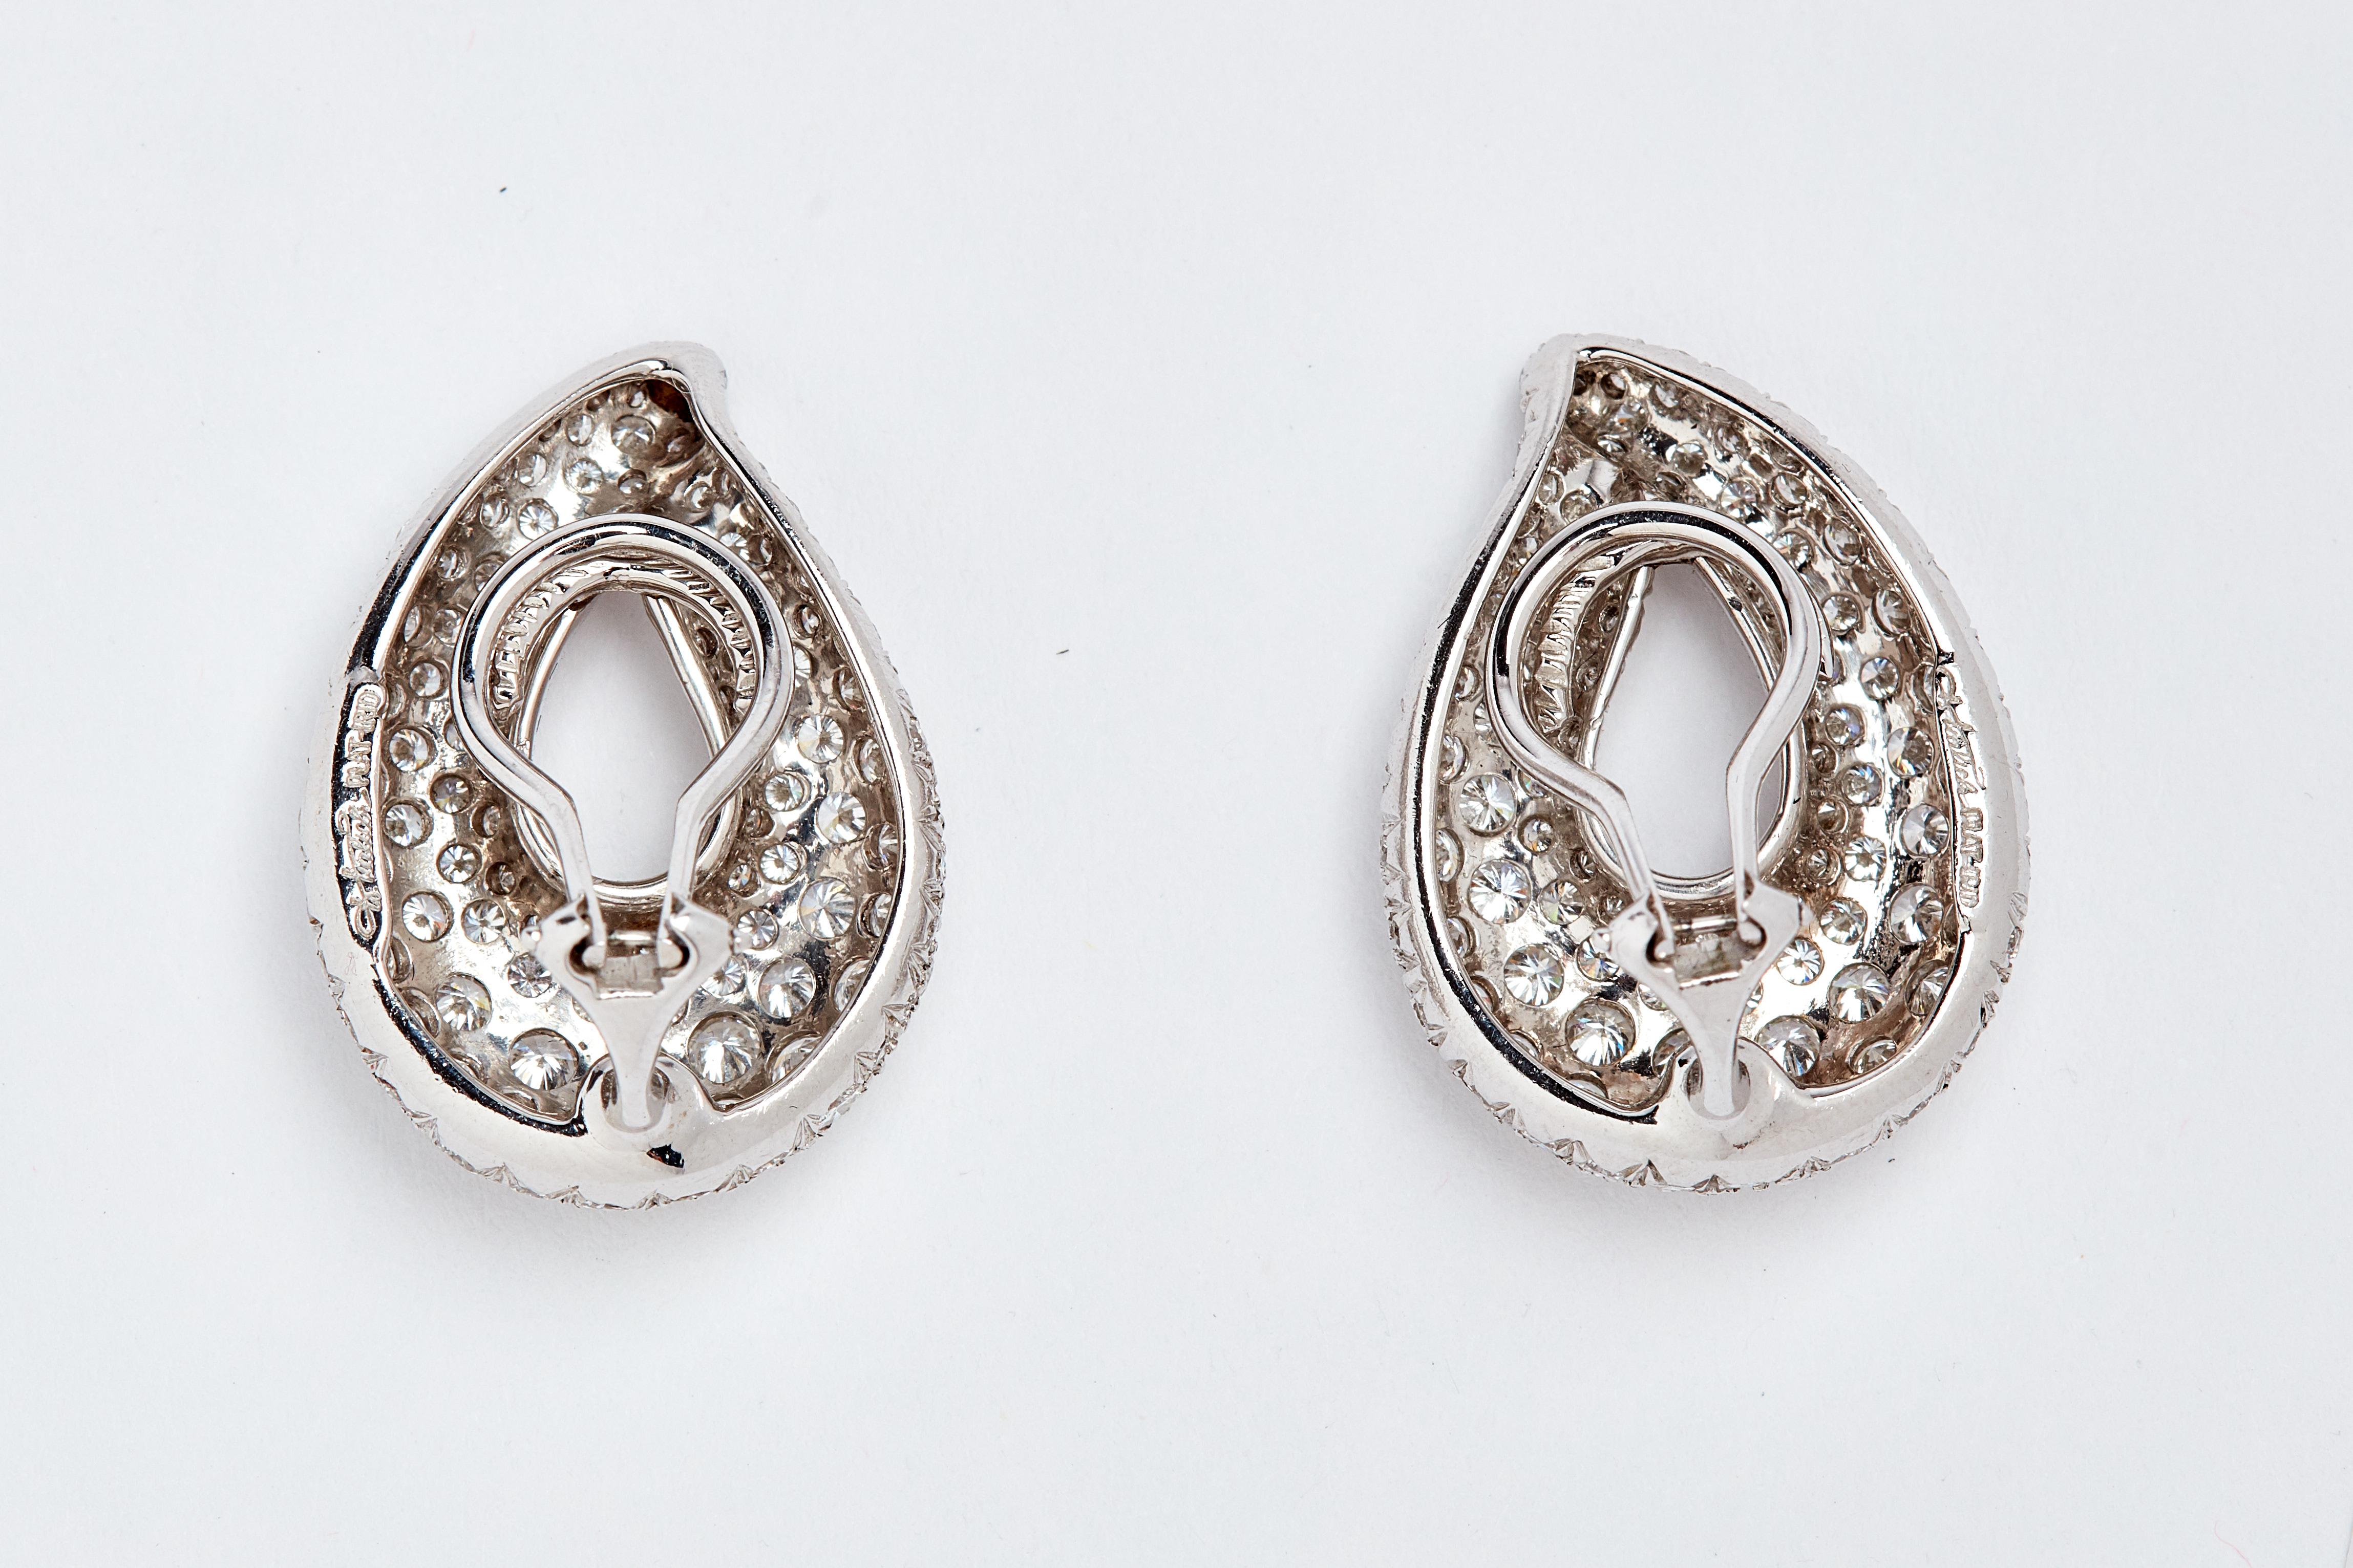 Platinum Pave Ear Clips. 260 white round diamonds. Aprox 7.50 carats total. 1 inch long. 